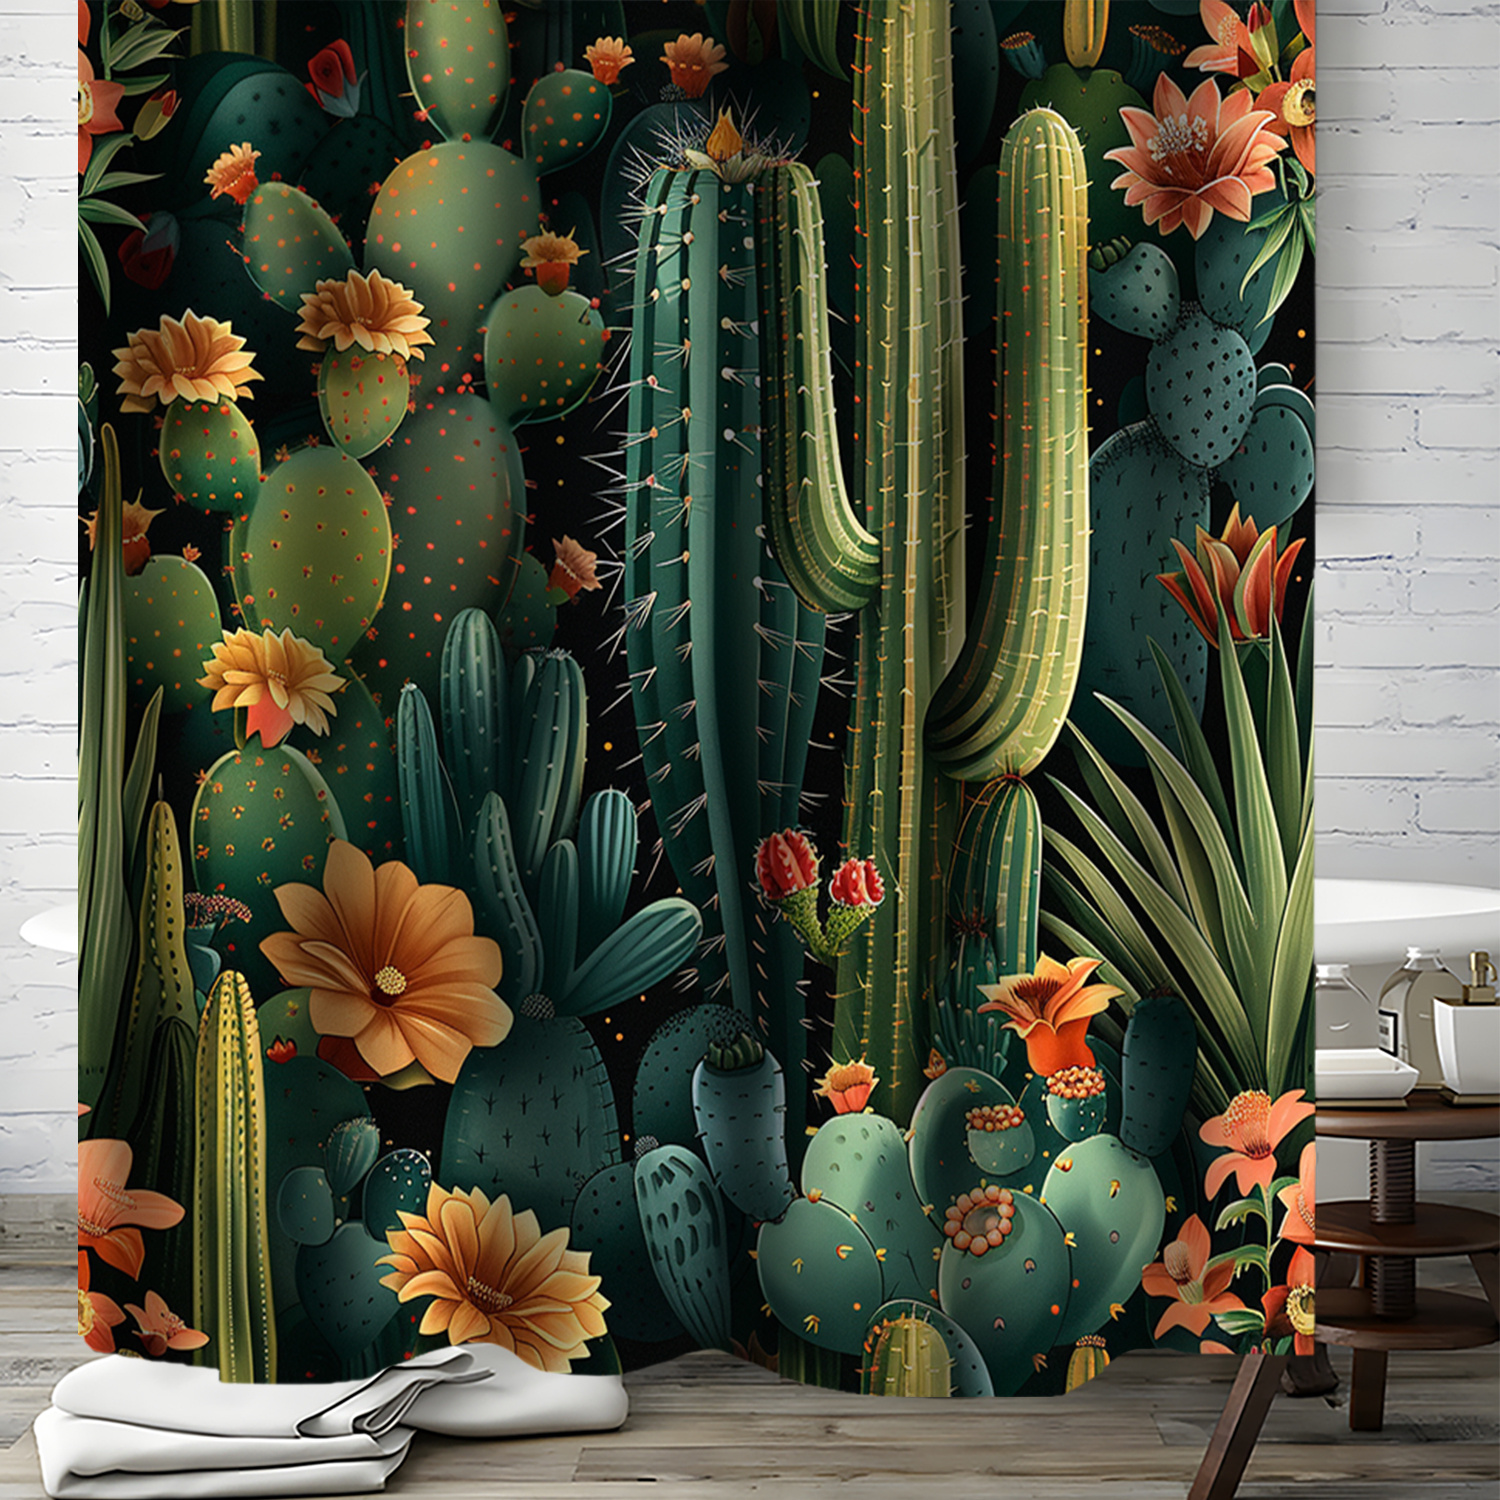 

Waterproof Country Style Cactus Wallpaper Shower Curtain With 12 Hooks, Polyester Mold Resistant Bathroom Decor, Artistic Floral Pattern, Woven Water-resistant Fabric, 71x71 Inches